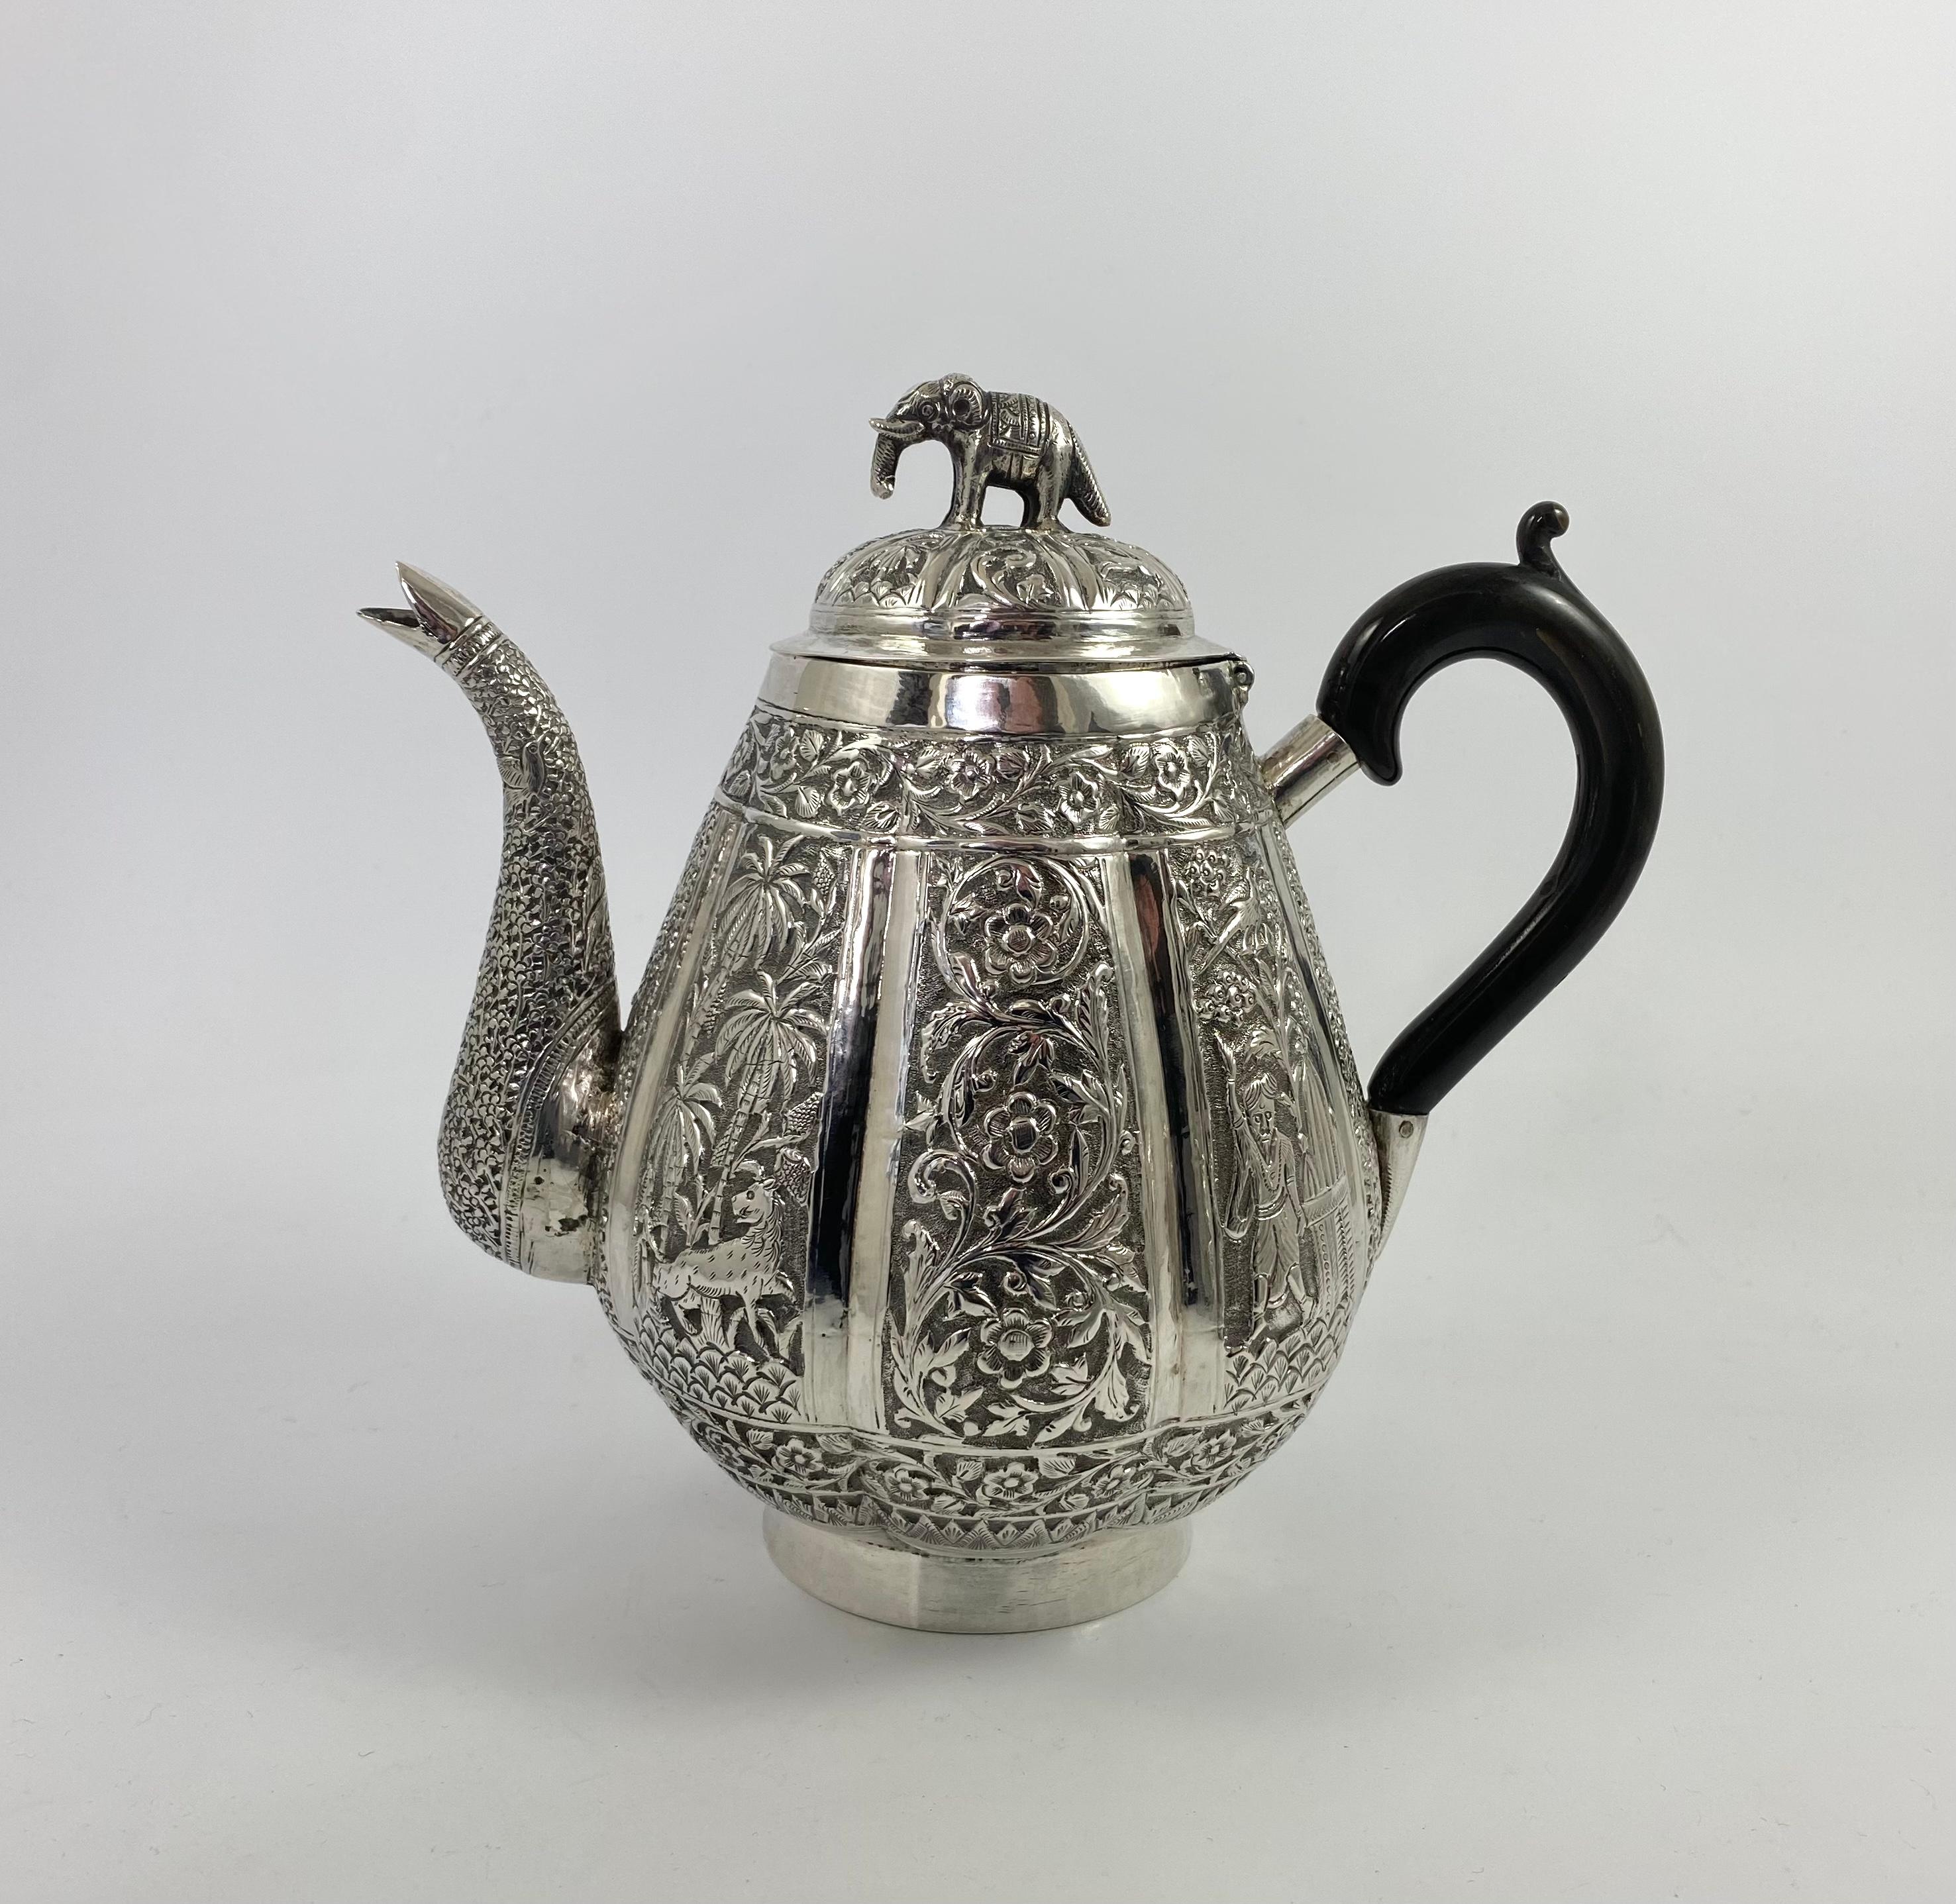 Indian silver three piece teaset, c. 1890. The lobe shaped teapot, chased with panels of flowering plants, figures in villages, and wild animals amongst trees, beneath a continuous panel of floral scrollwork. The spout with birds amongst dense